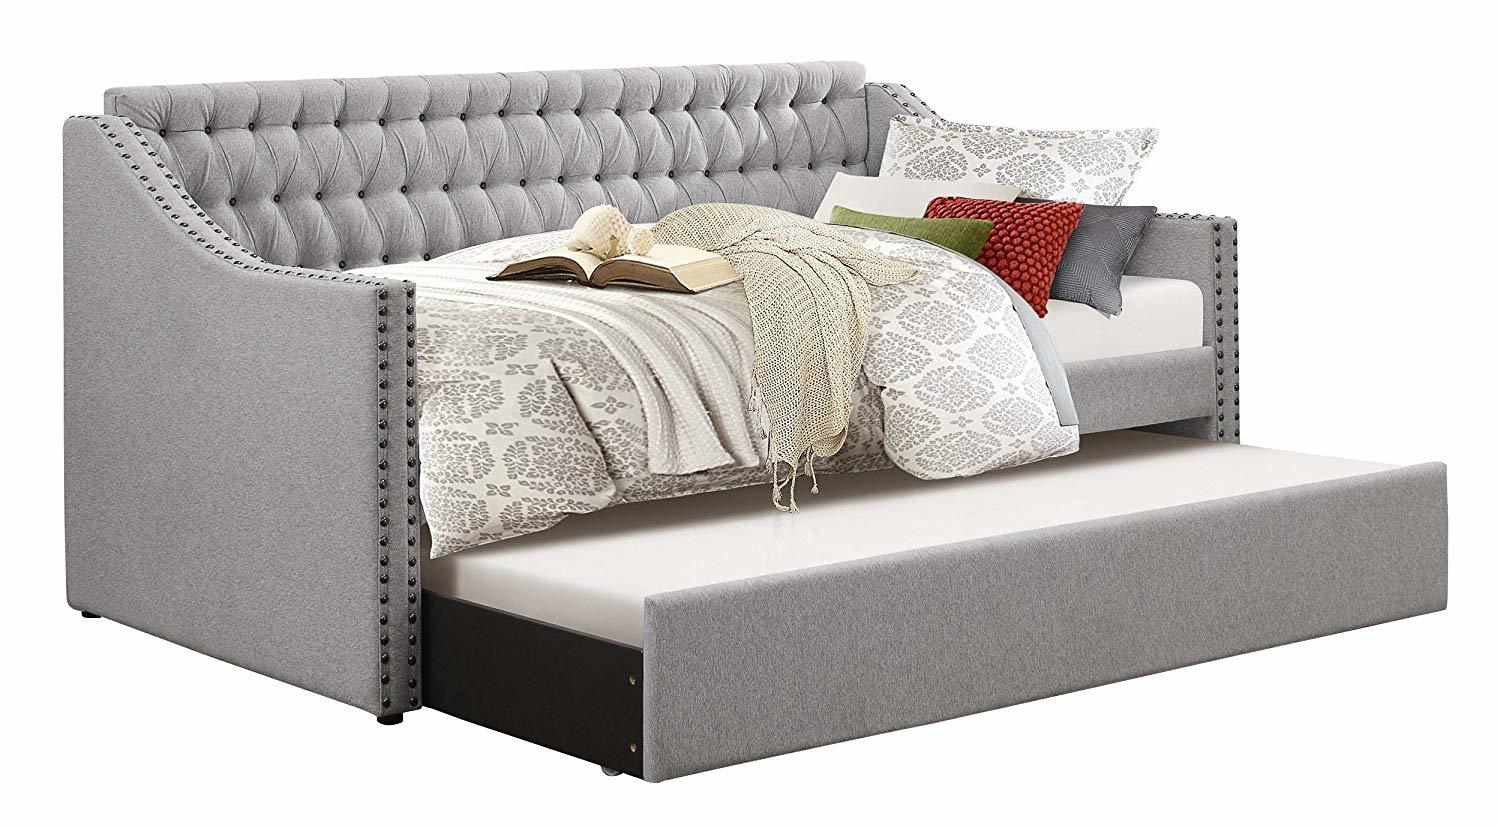 pull down sofa beds